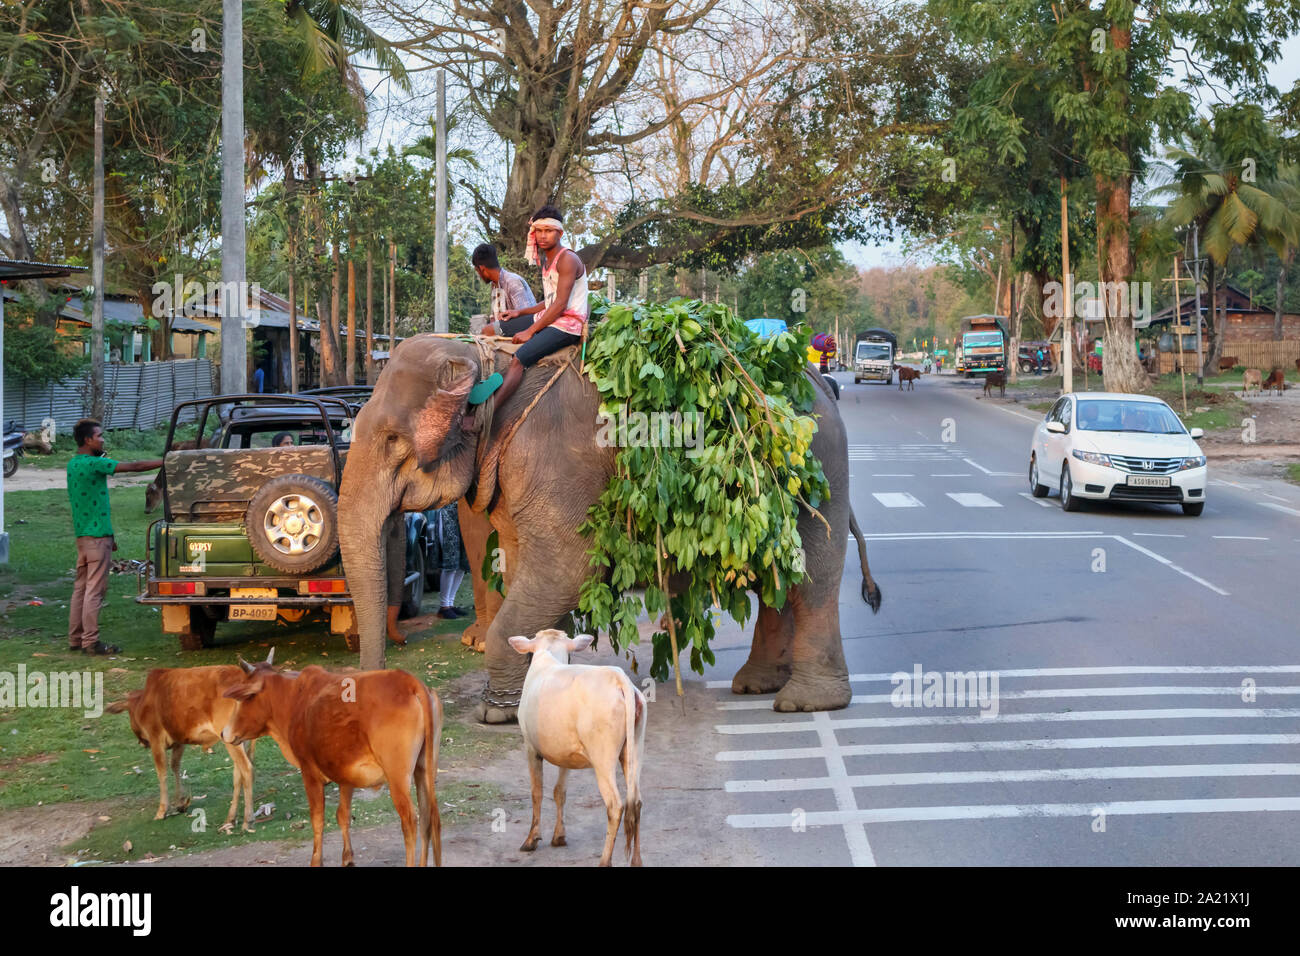 Street scene in Kaziranga, Assam, India: a working Indian Elephant with its mahout carrying a load of leafy branches stands by the roadside Stock Photo